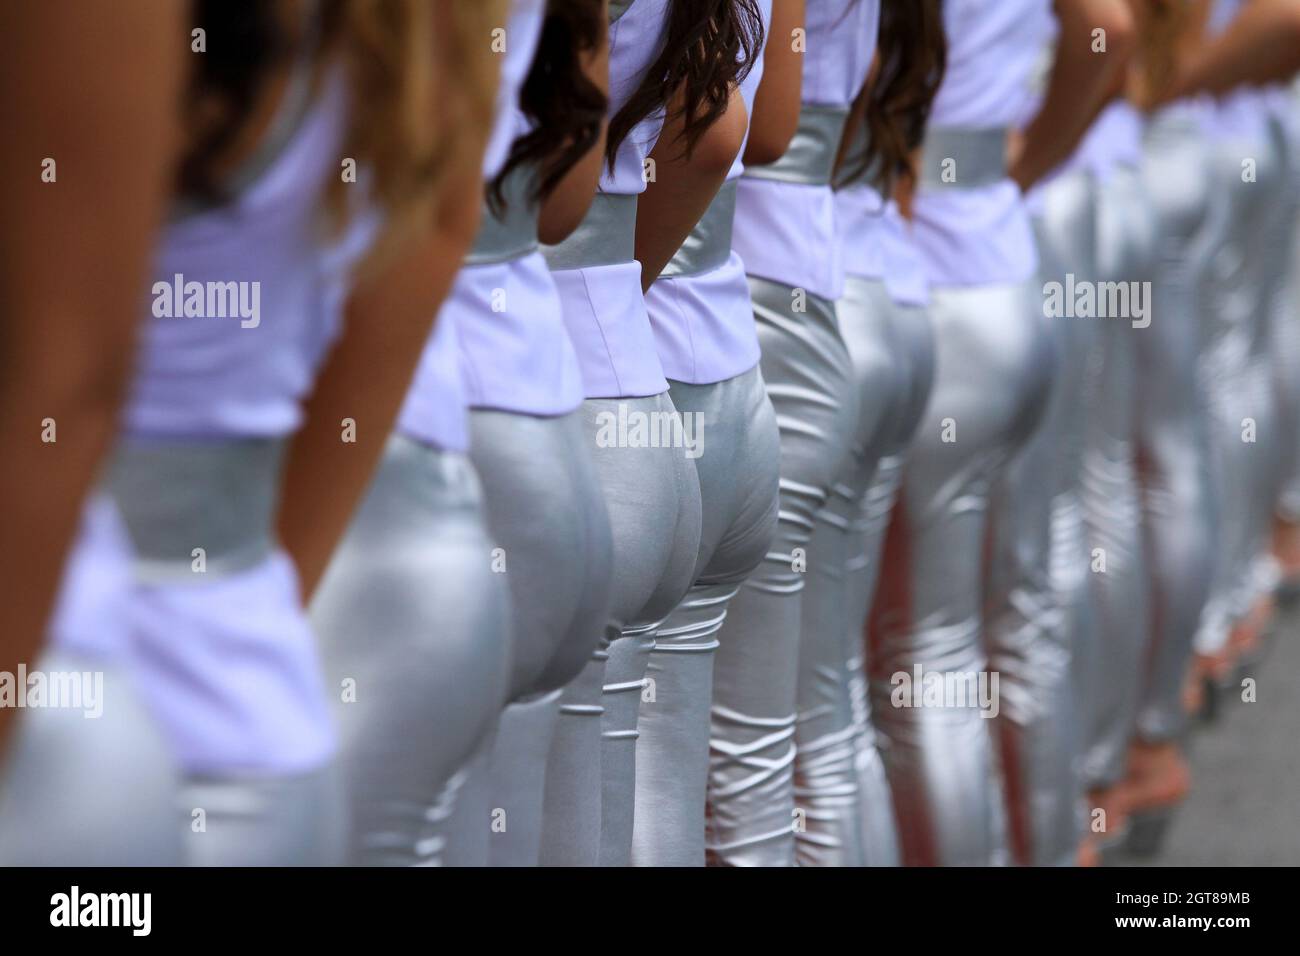 Midsection Of Women In Sports Clothing Stock Photo